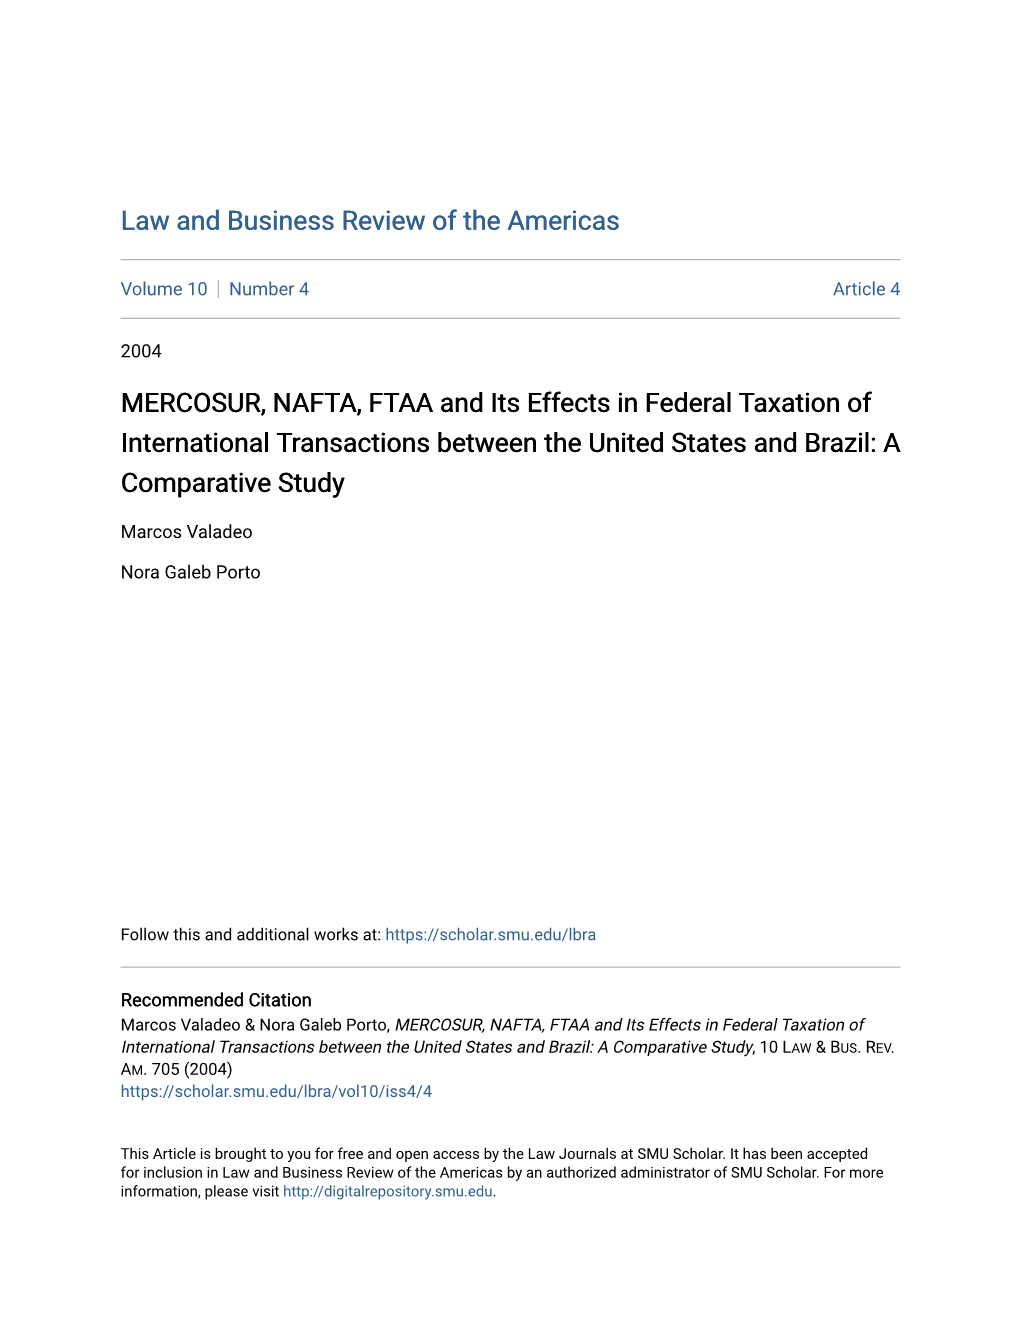 MERCOSUR, NAFTA, FTAA and Its Effects in Federal Taxation of International Transactions Between the United States and Brazil: a Comparative Study